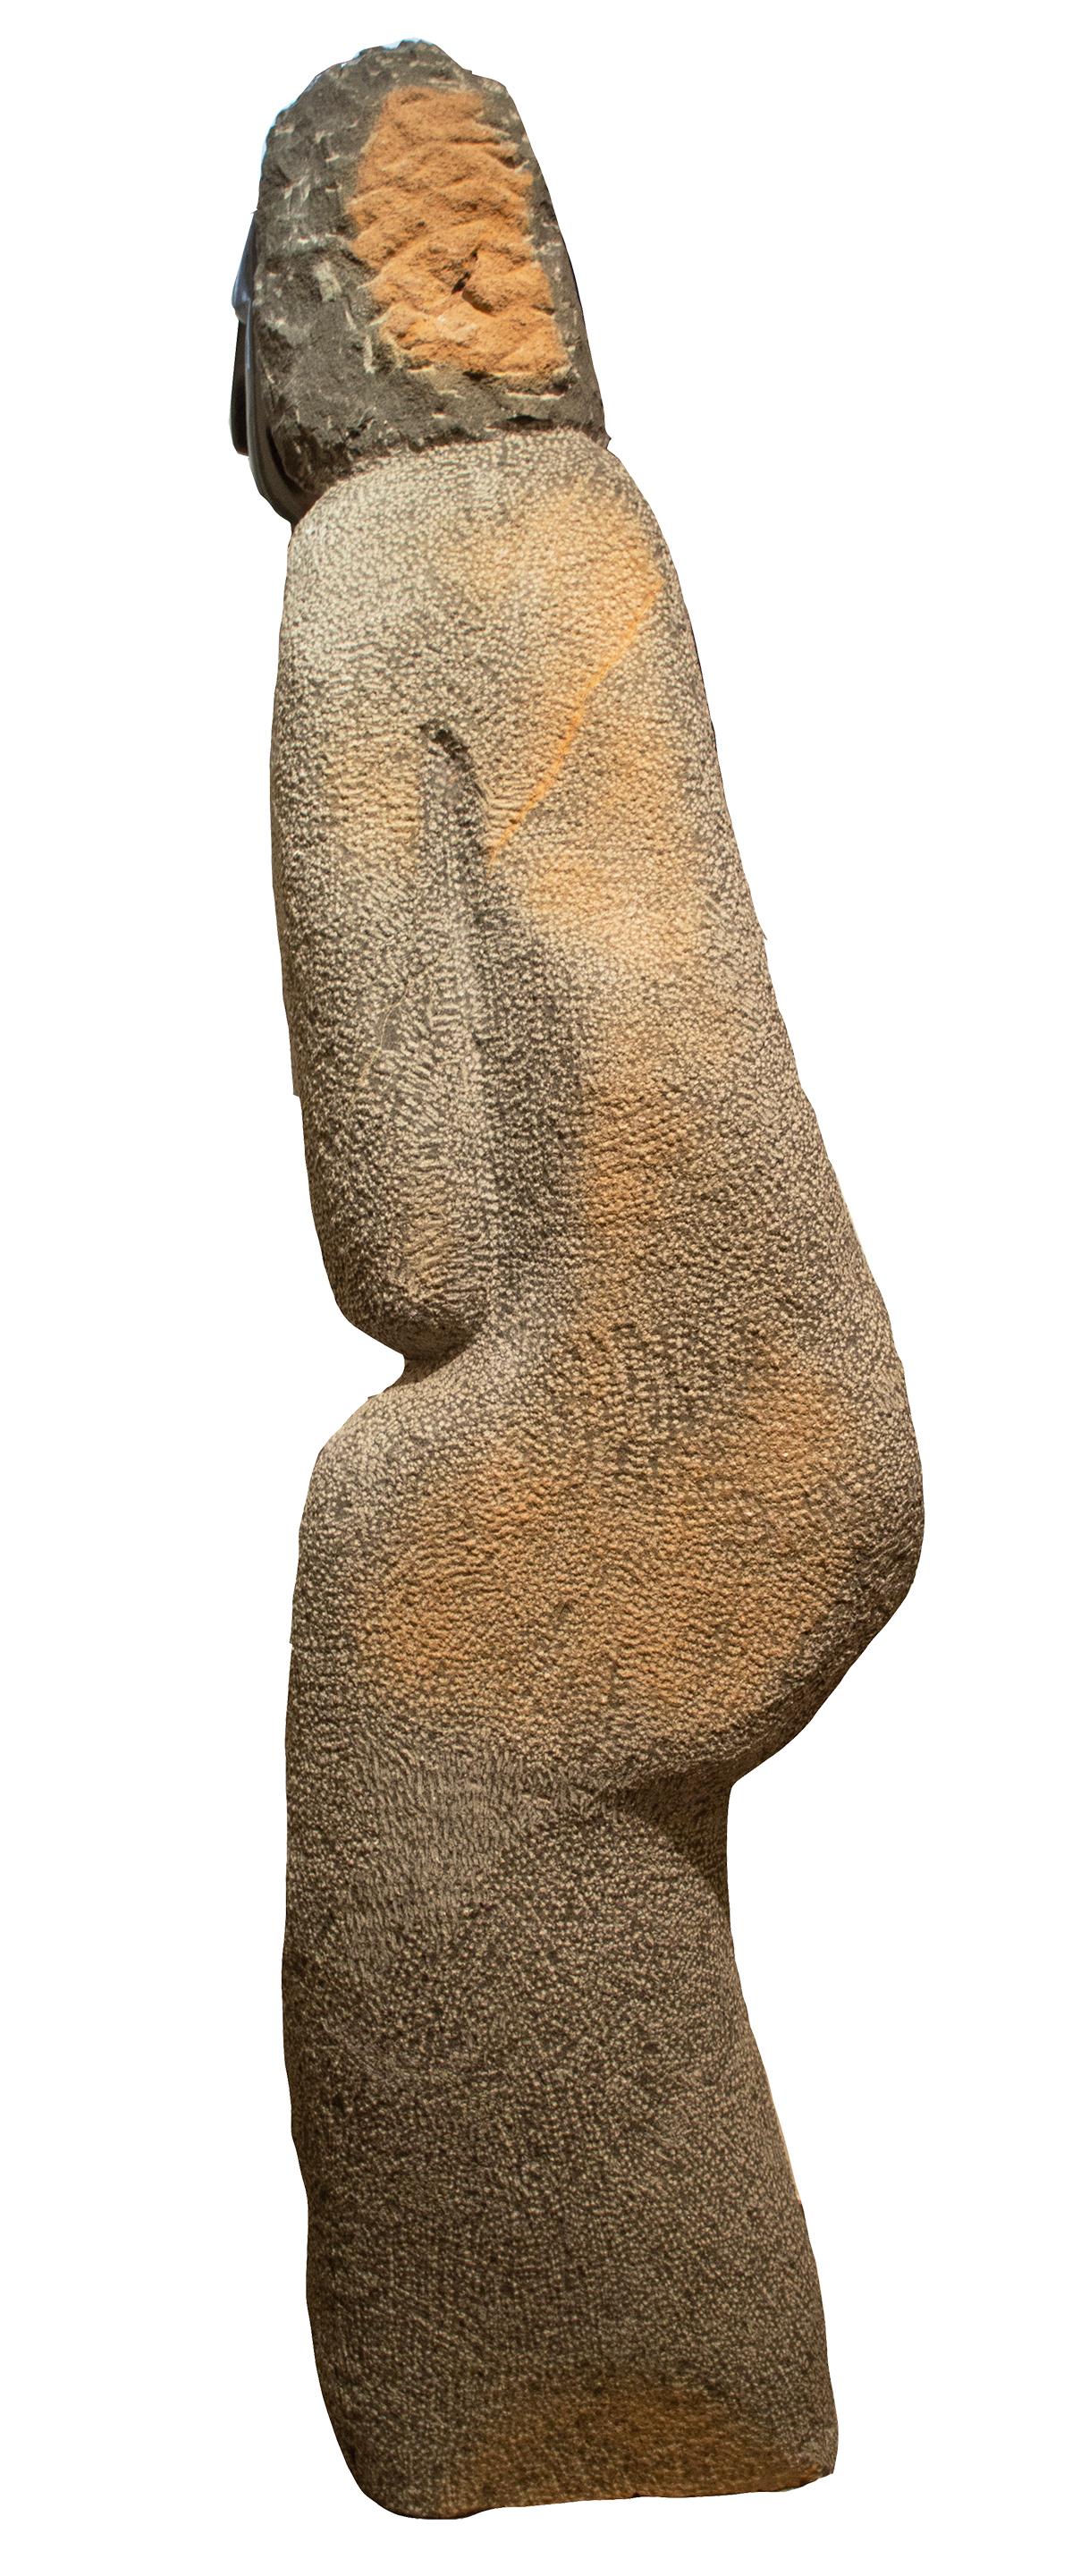 'Dressed For Tonight' Shona stone sculpture signed by Rangarirai Makunde  For Sale 2